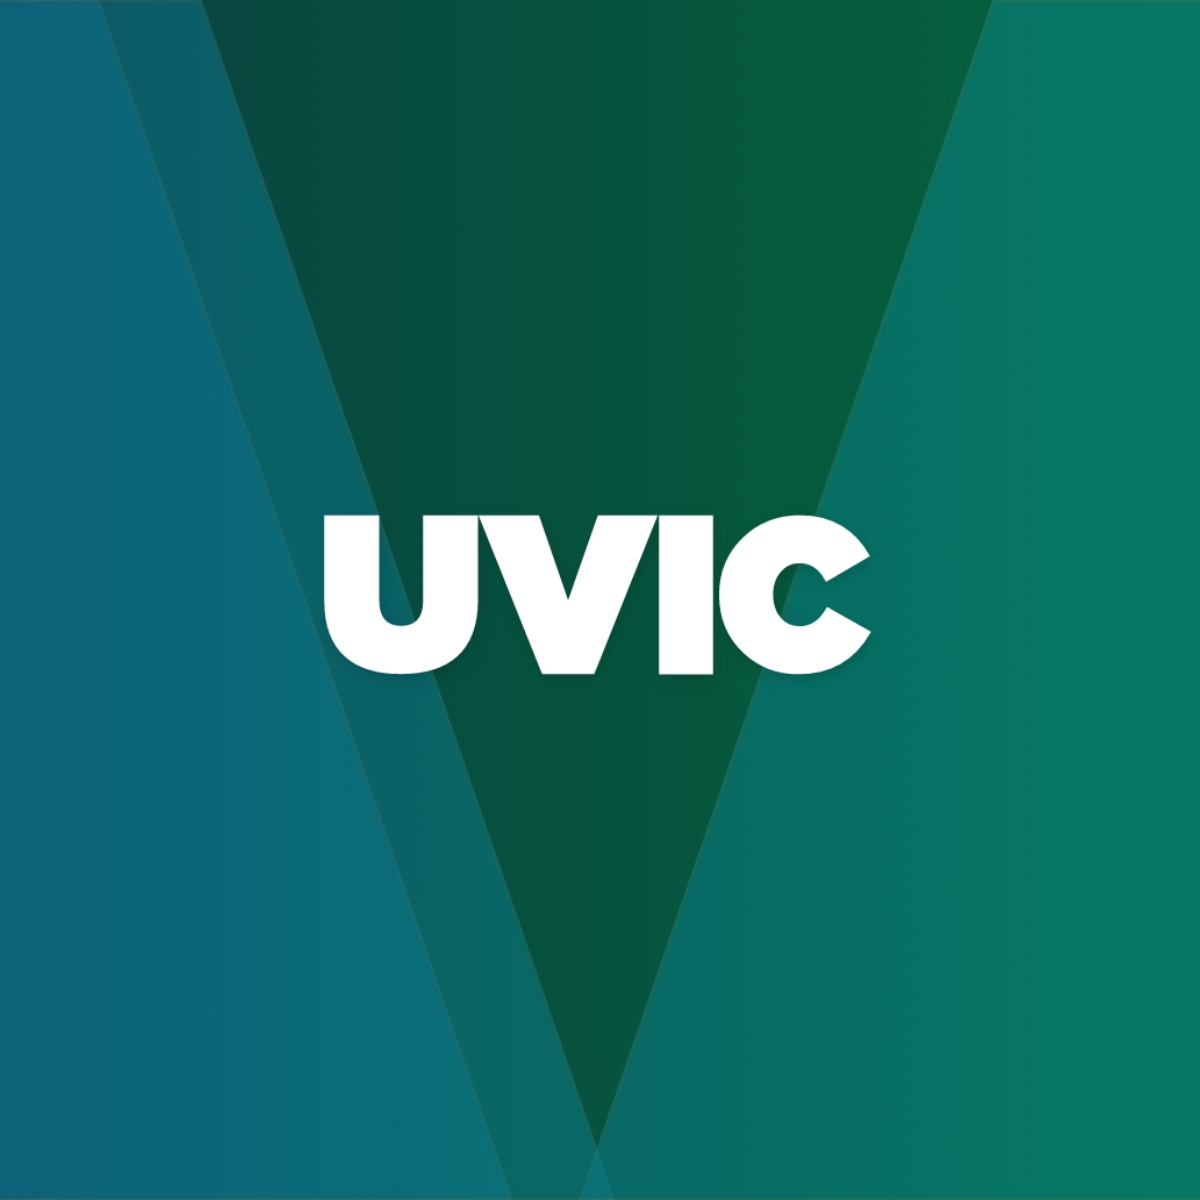 uvic feature2 - Our Work